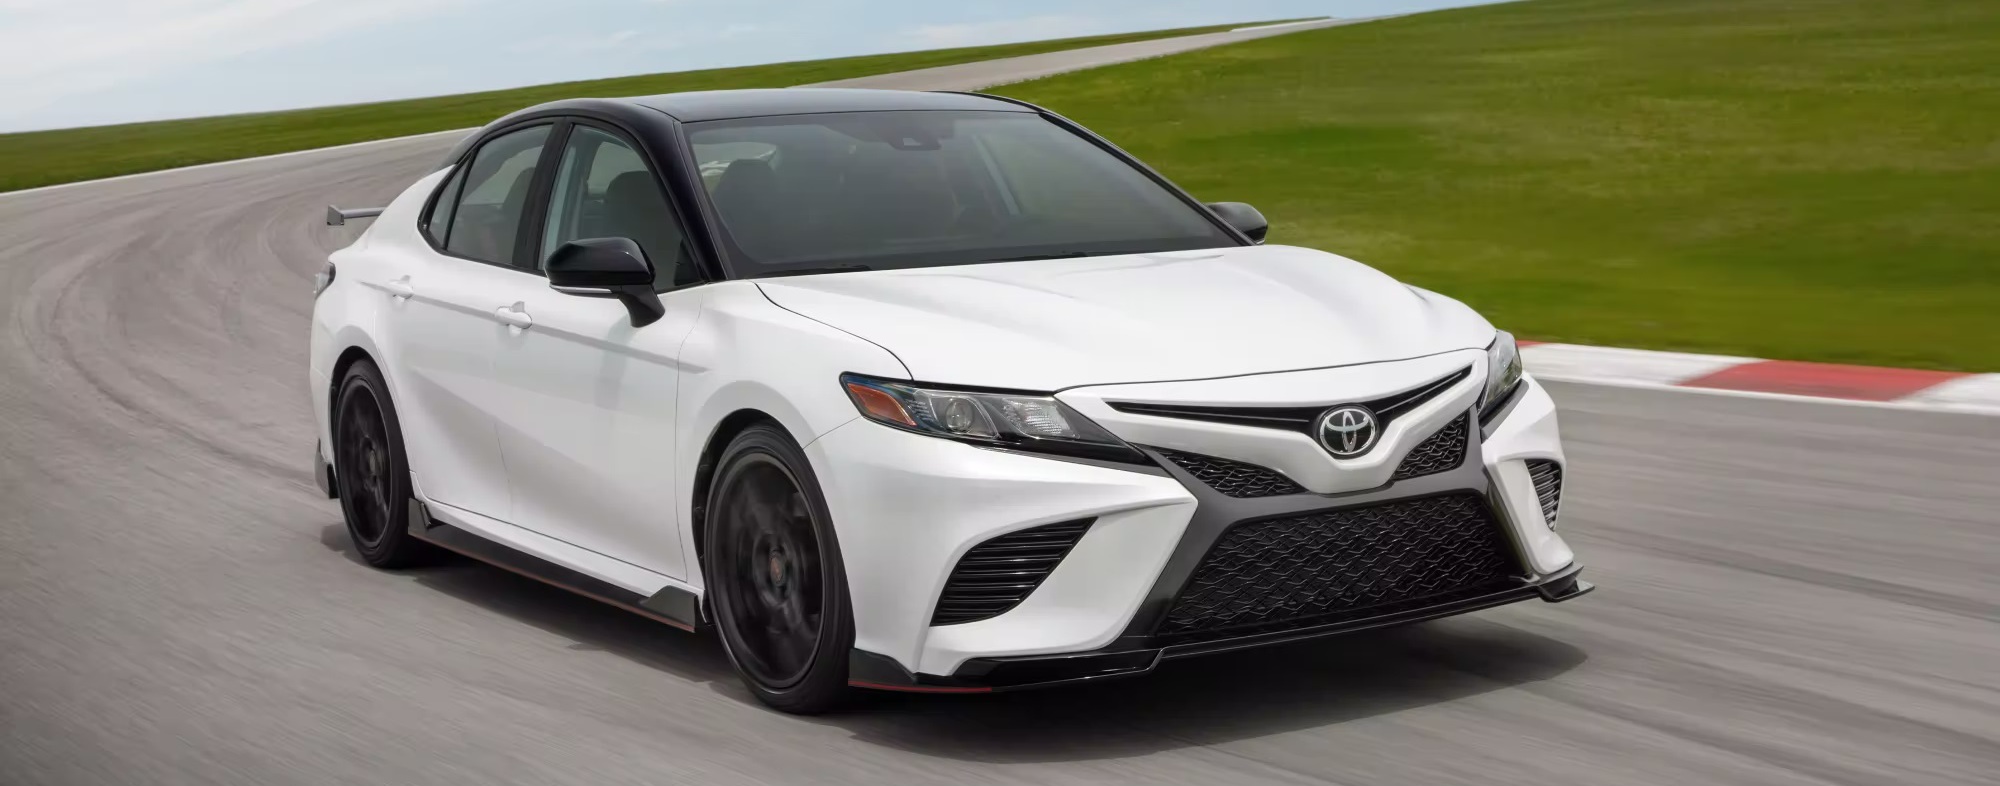 Toyota Camry Raises to New Heights with No Compromises